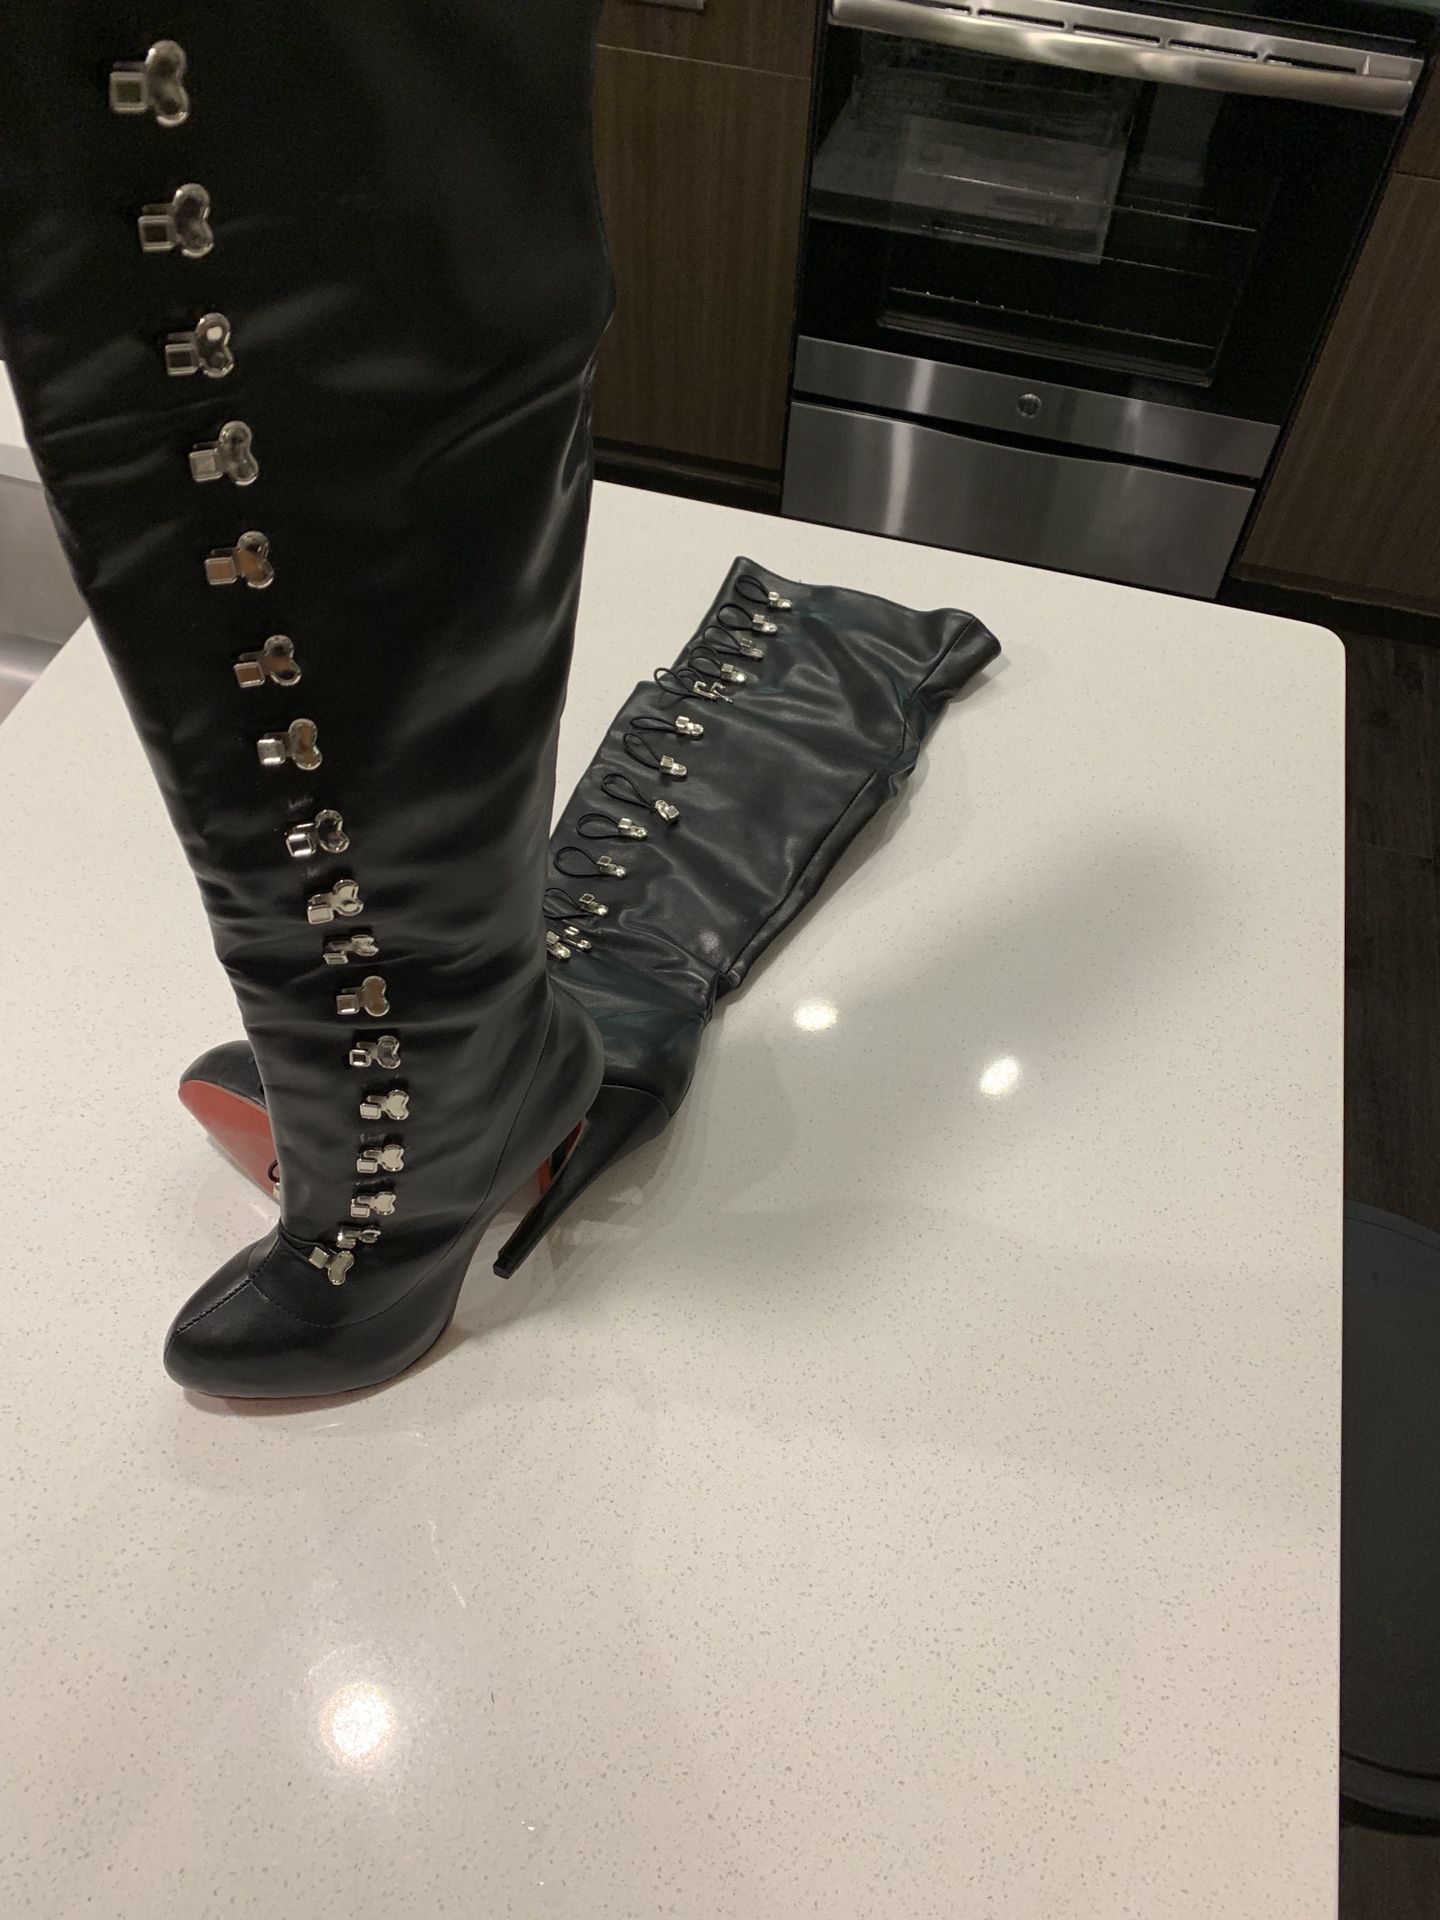 Christian Louboutin Rain boots Sz 7 US Authentic for Sale in Federal Way,  WA - OfferUp